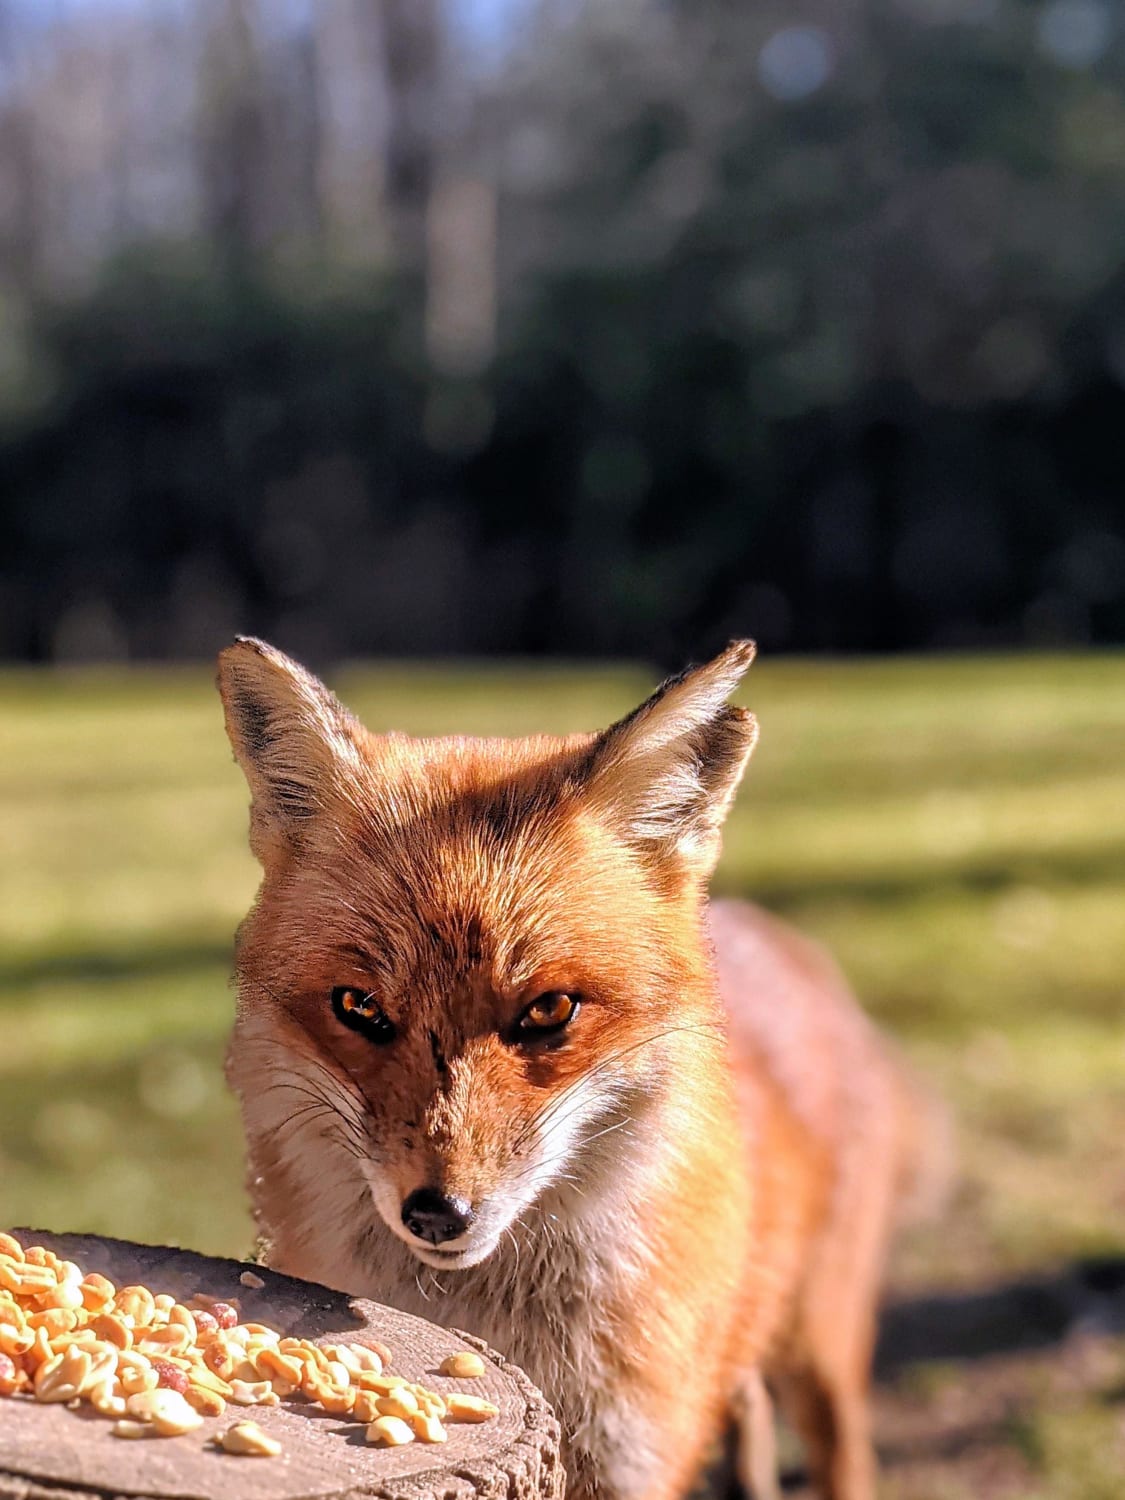 Paprika, our neighborhood male fox, bearing the scrapes of mating season